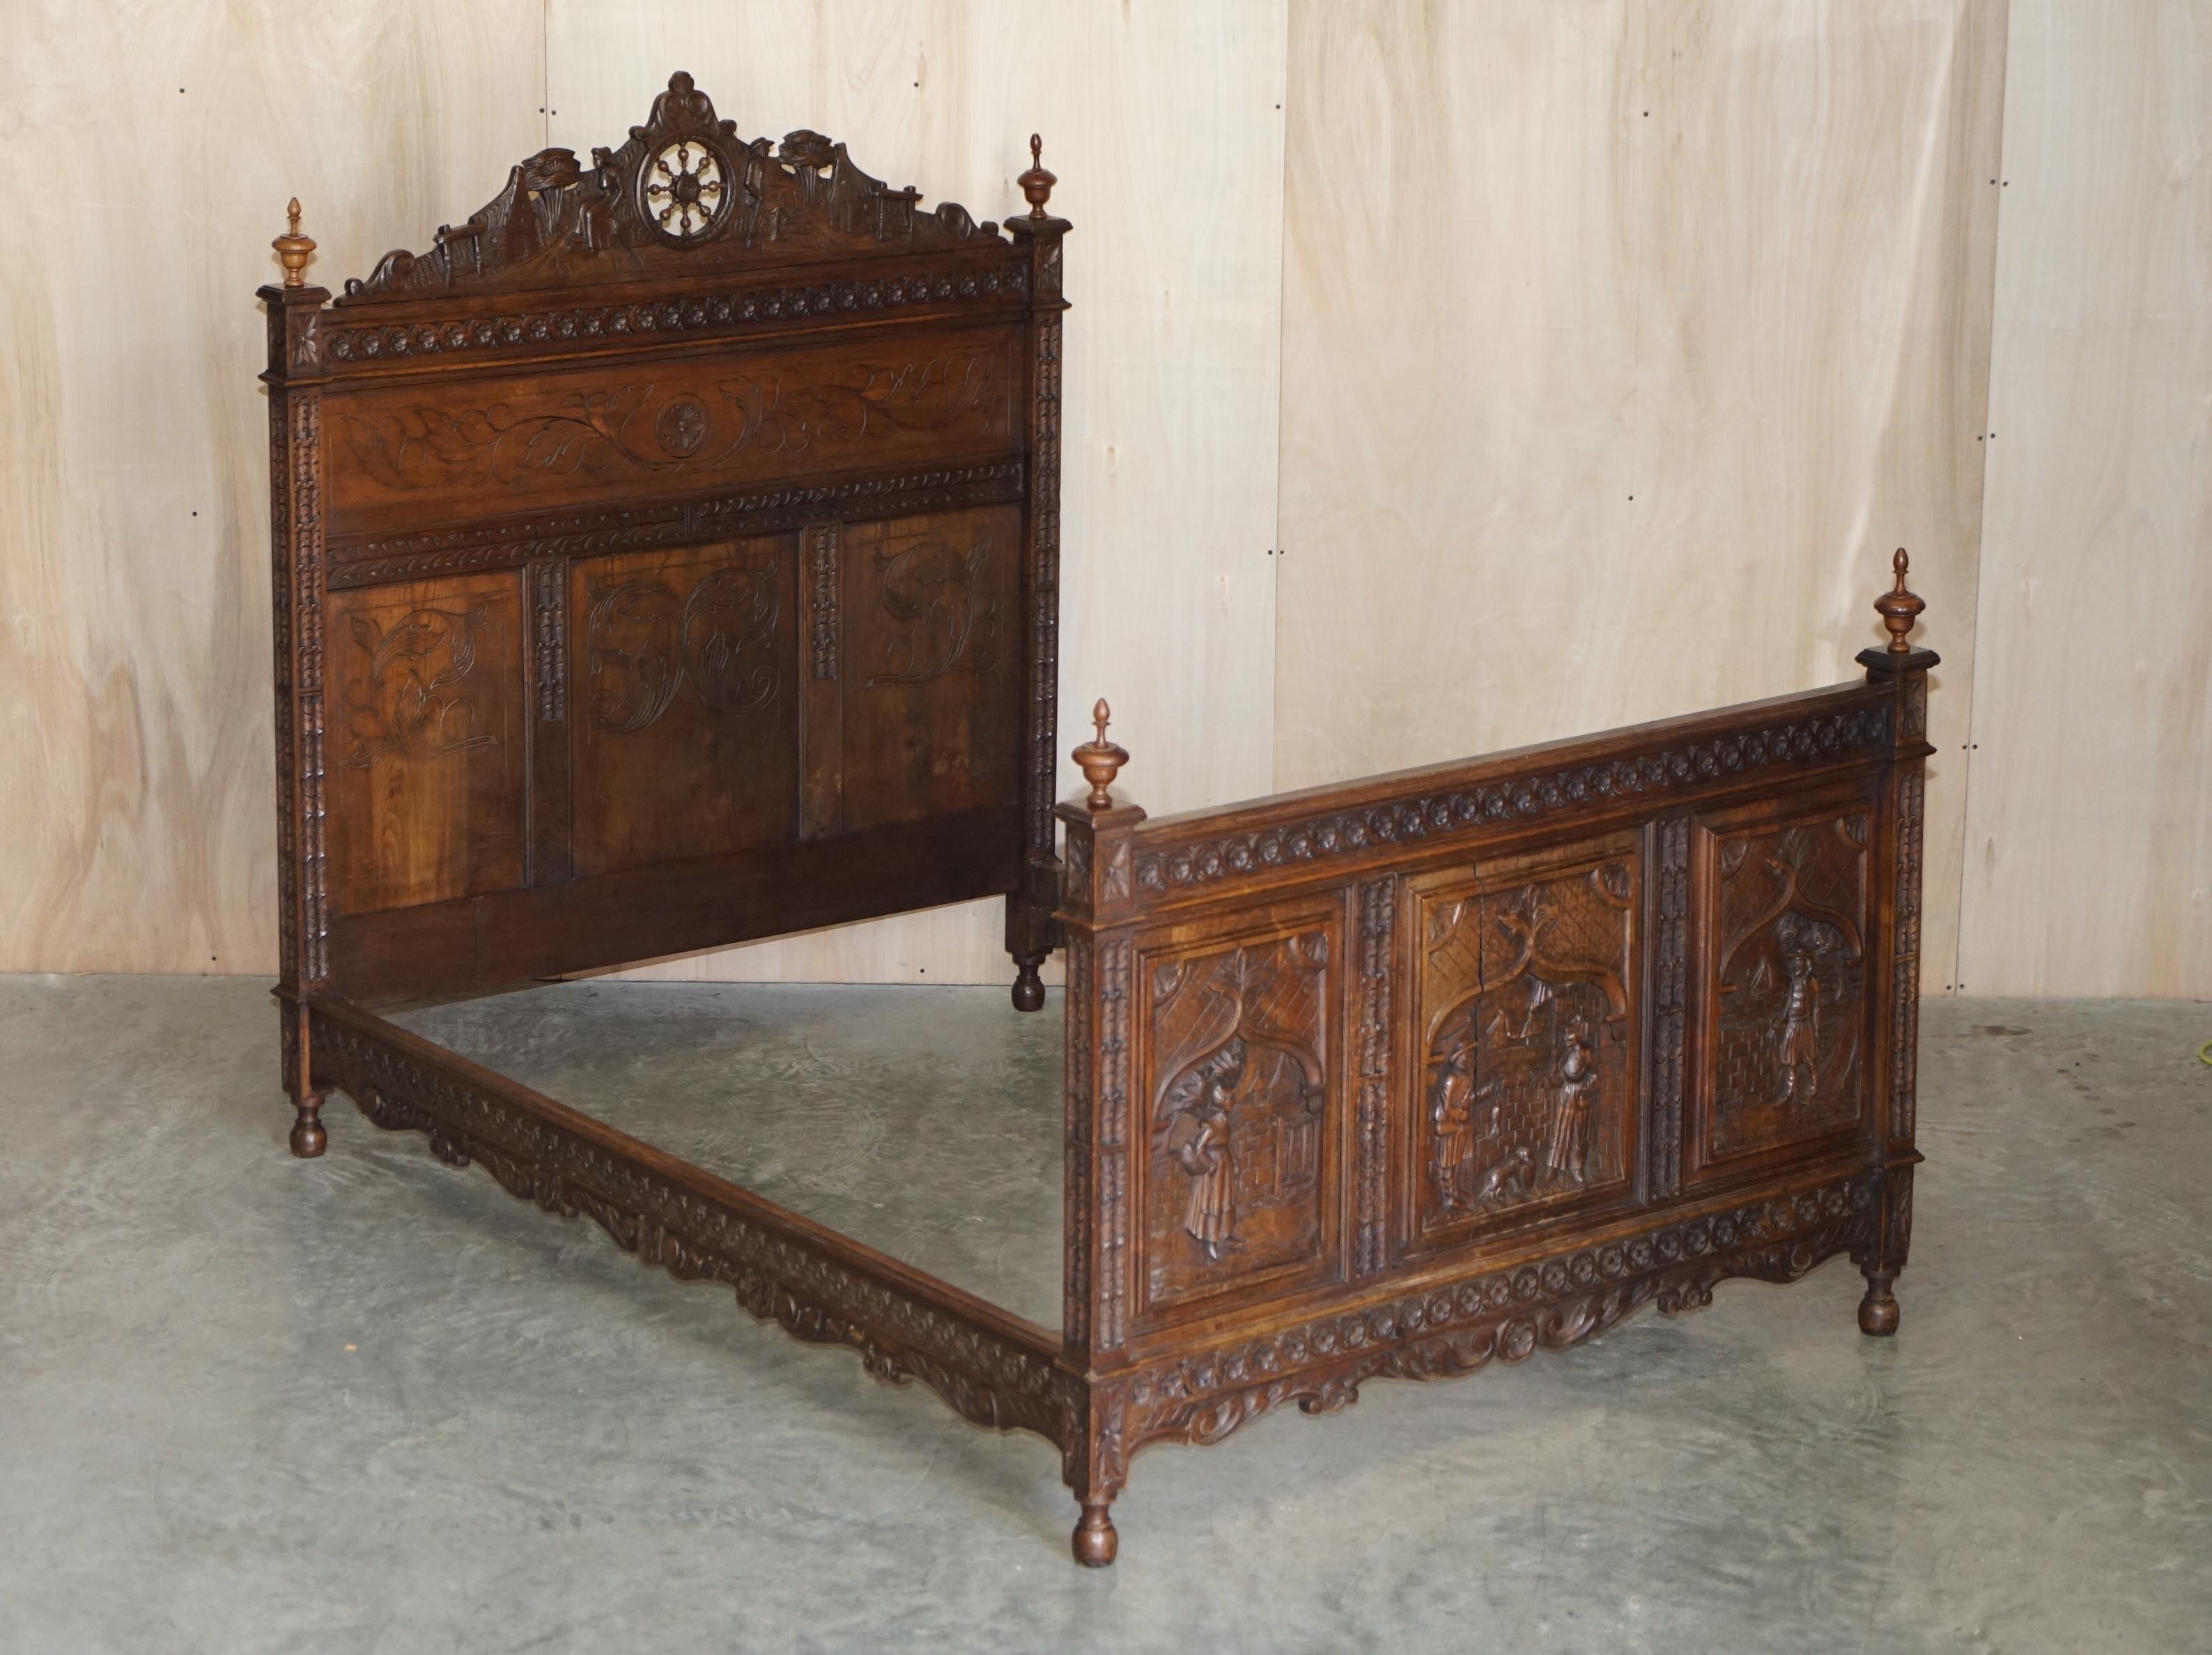 We are delighted to offer for sale this stunning, circa 1860 Continental oak, hand carved double bed frame with stunning panels

A very good looking and well made bed frame in sublime condition, its continental, most likely Dutch, the panels are